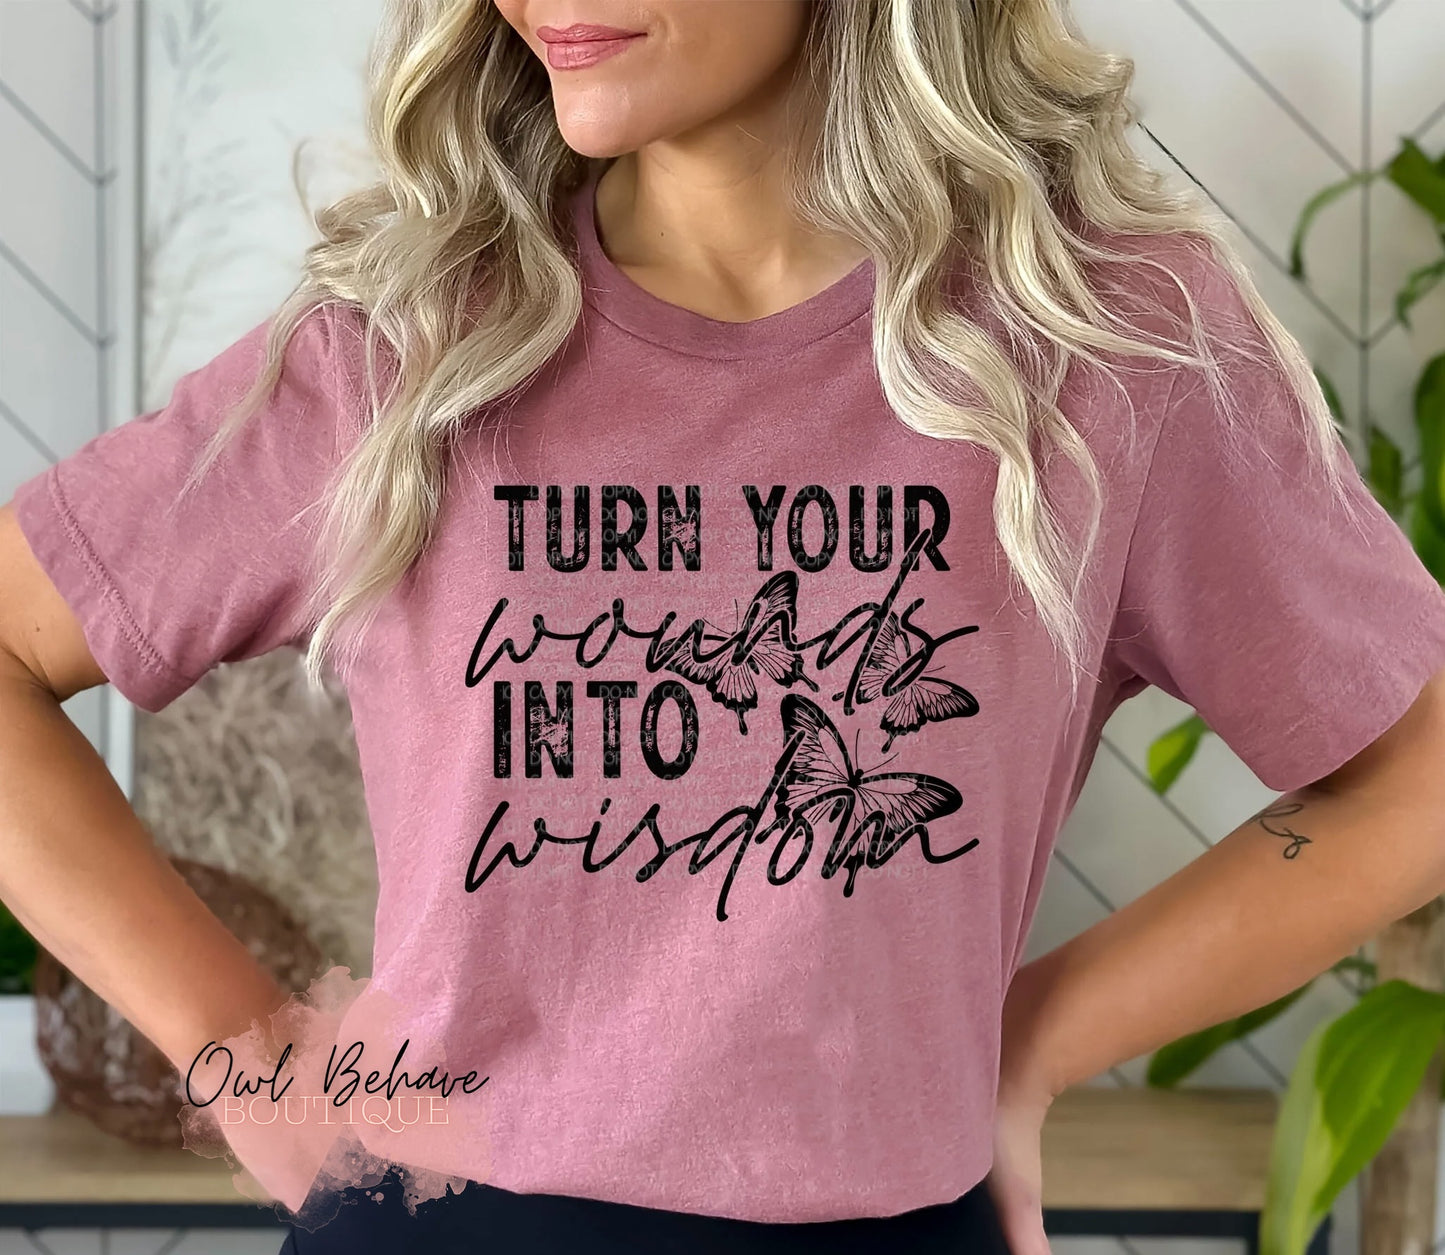 Turn Your Wounds Into Wisdom Adult T-Shirt